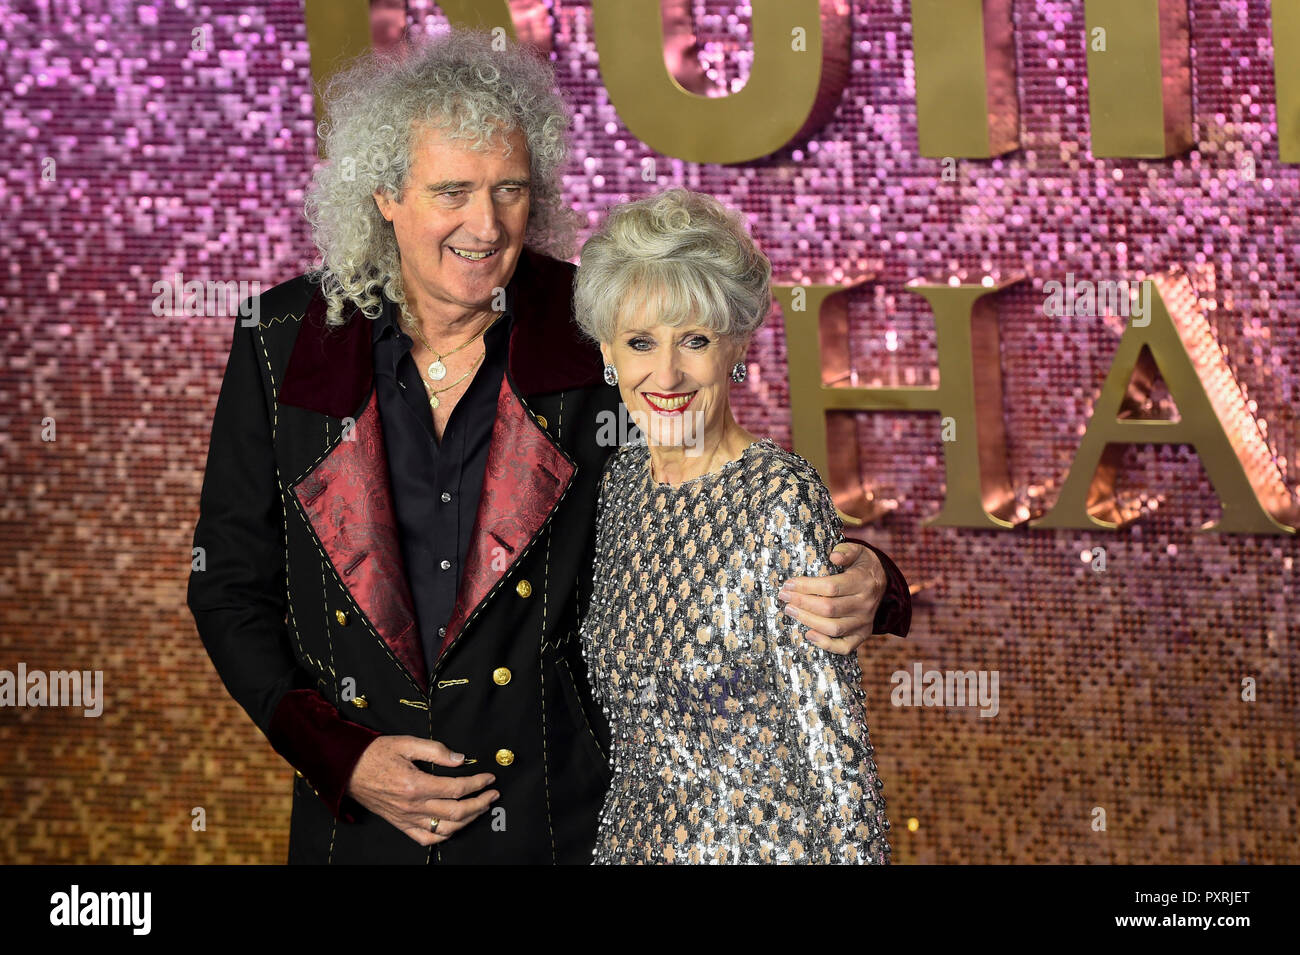 London, UK.  23 October 2018. Queen's Brian May and wife Anita Dobson arrive for the worldwide premiere of the movie "Bohemian Rhapsody" at The SSE Arena in Wembley. Credit: Stephen Chung / Alamy Live News Stock Photo